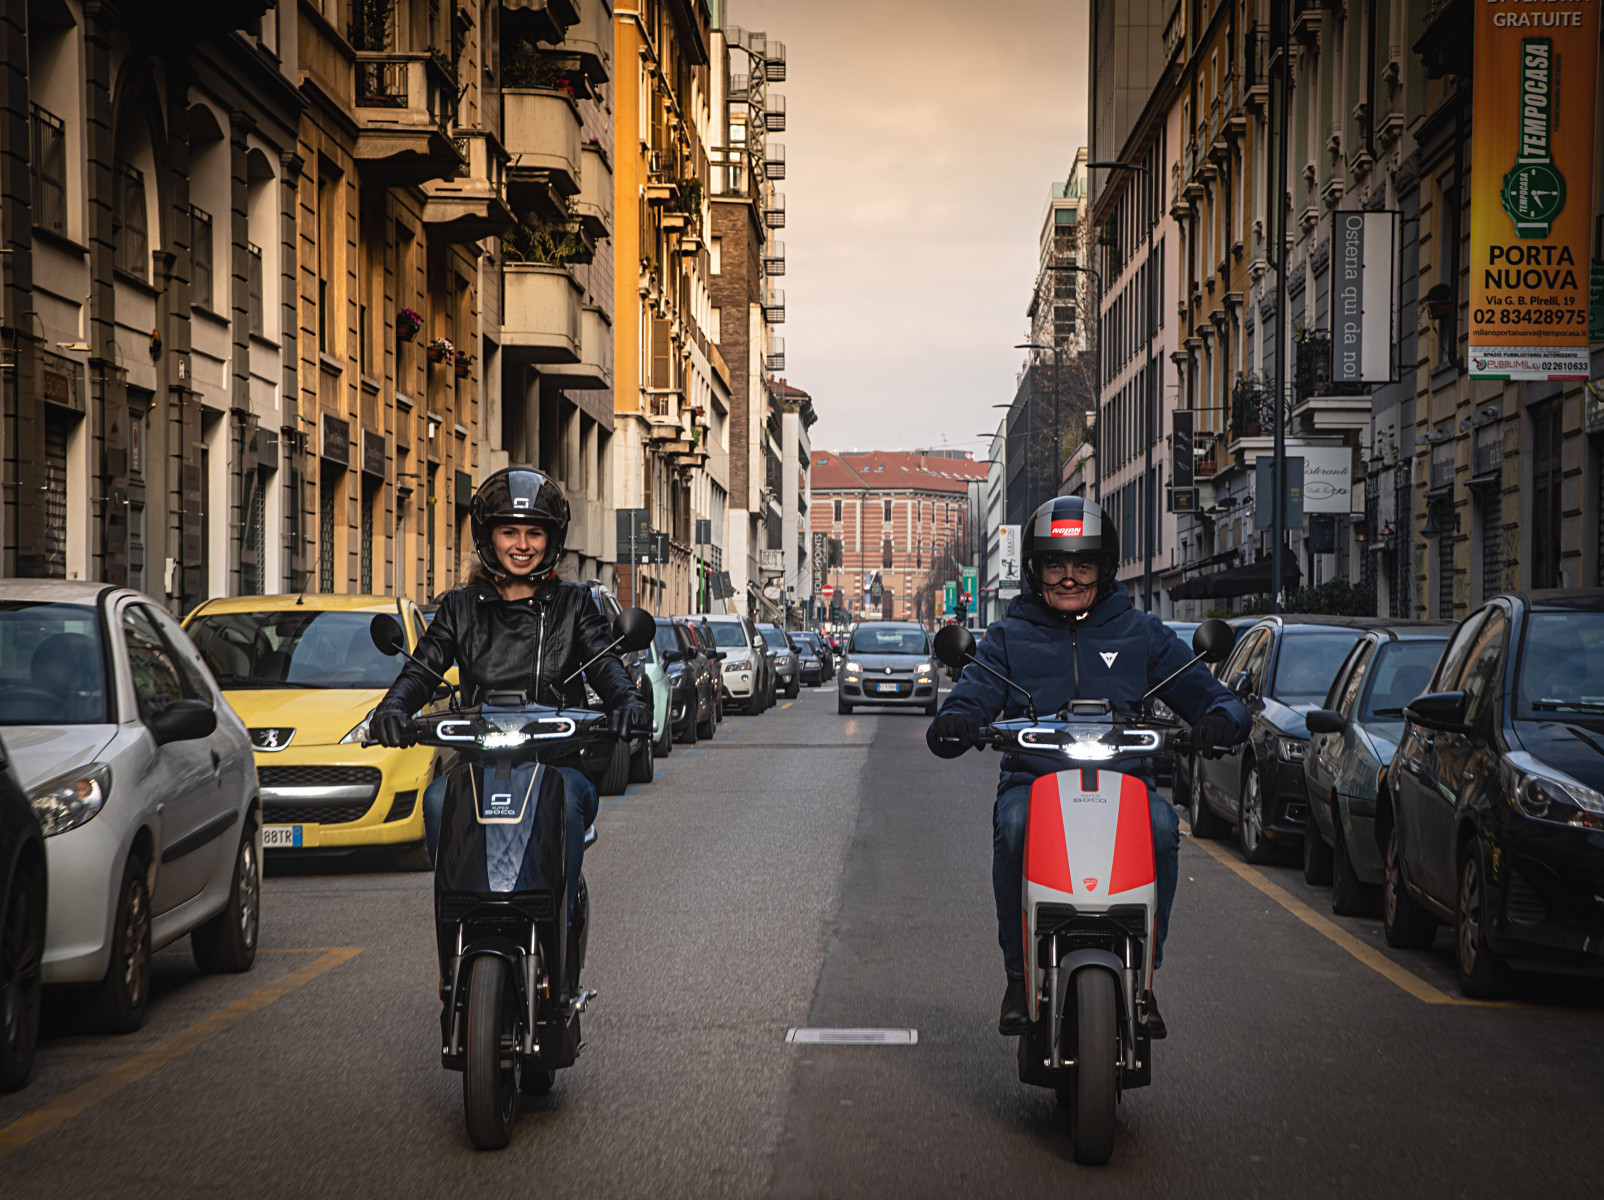 Super Soco CUx electric scooter Ducati Edition being ridden in Milan